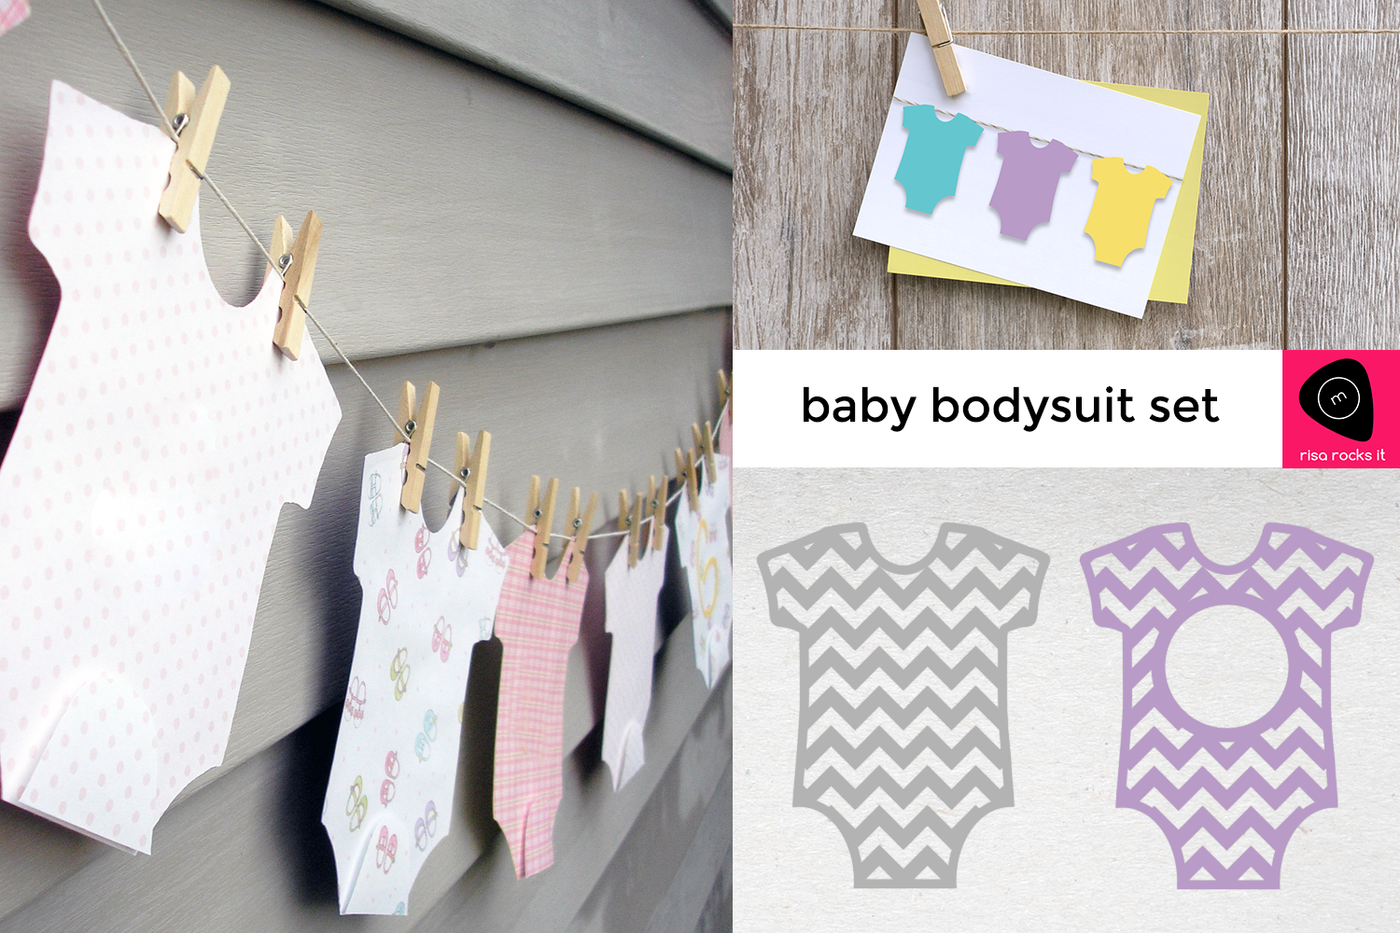 Collage: Baby bodysuit set by Risa Rocks It. Left = paper bodysuits hanging from a clothesline in different patterns/colors. Top right = white card with 3 pastel bodysuits on a string. Card is pinned to a clothesline against a wood background. Bottom right = Two bodysuit designs, each with a chevron pattern. The left is grey, the right is lavender with a circle in the middle for adding a monogram.